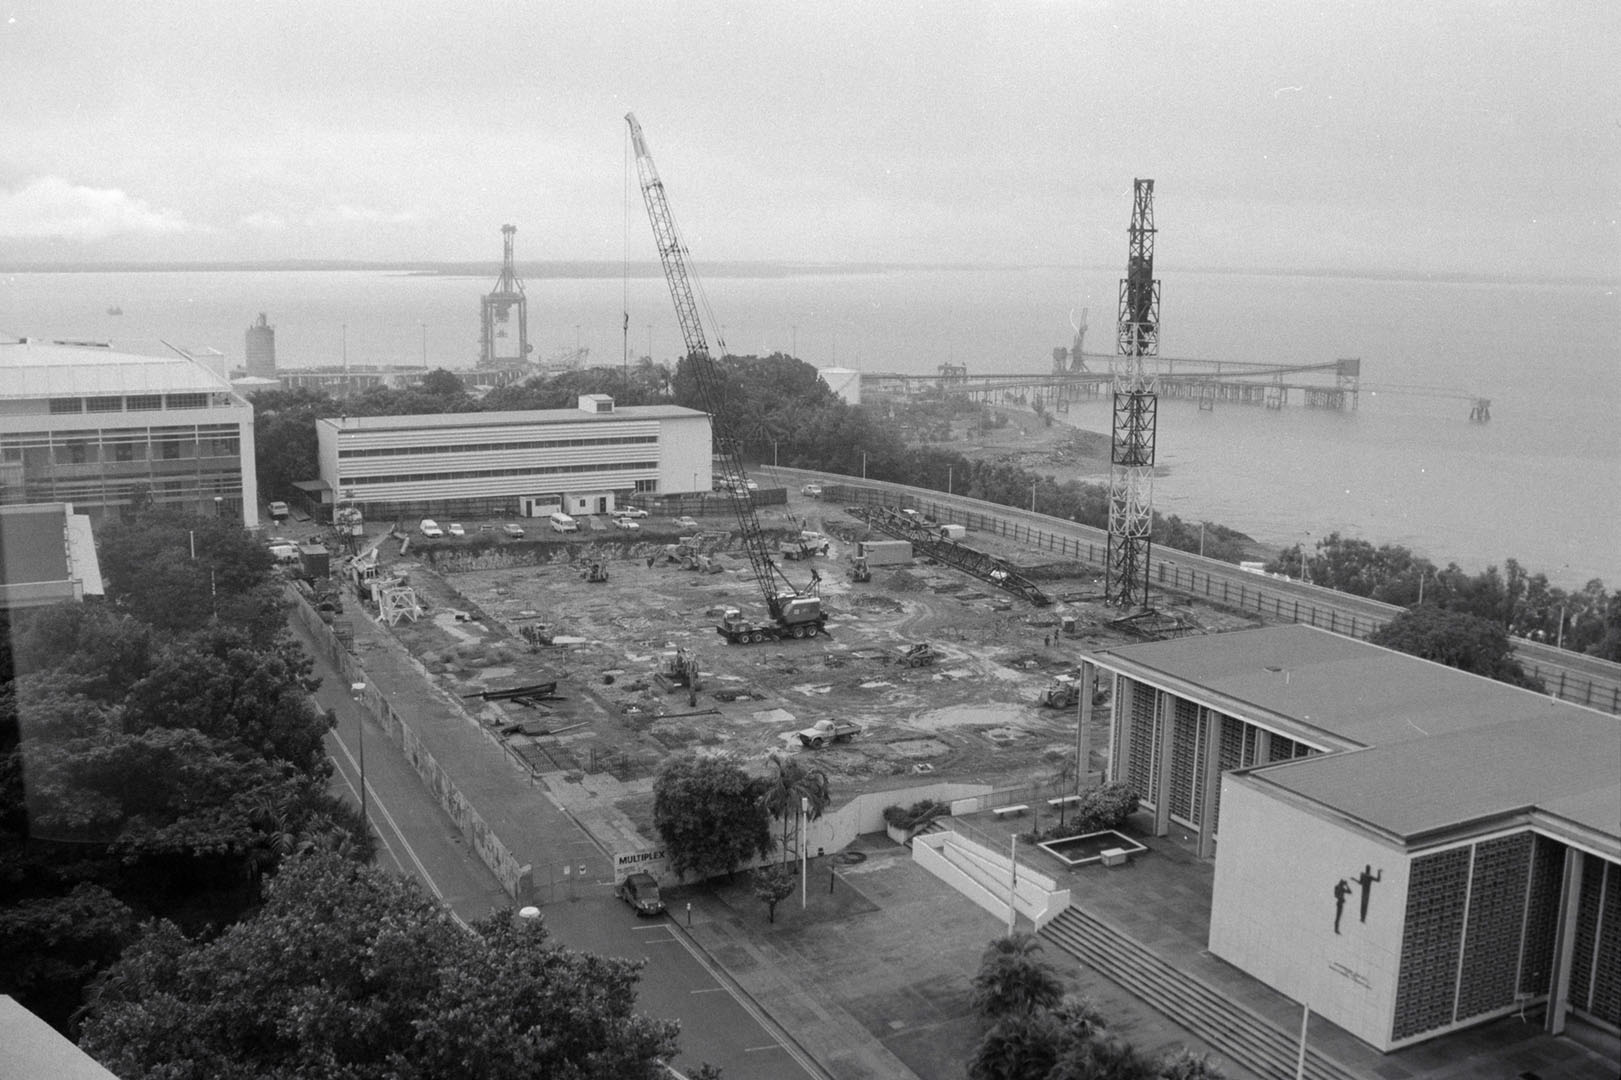 New Parliament House construction site, January 1991<br>Image courtesy of Library & Archives NT, Department of the Chief Minister, NTRS 3823 P1, Box 11, BW2959, Image 30